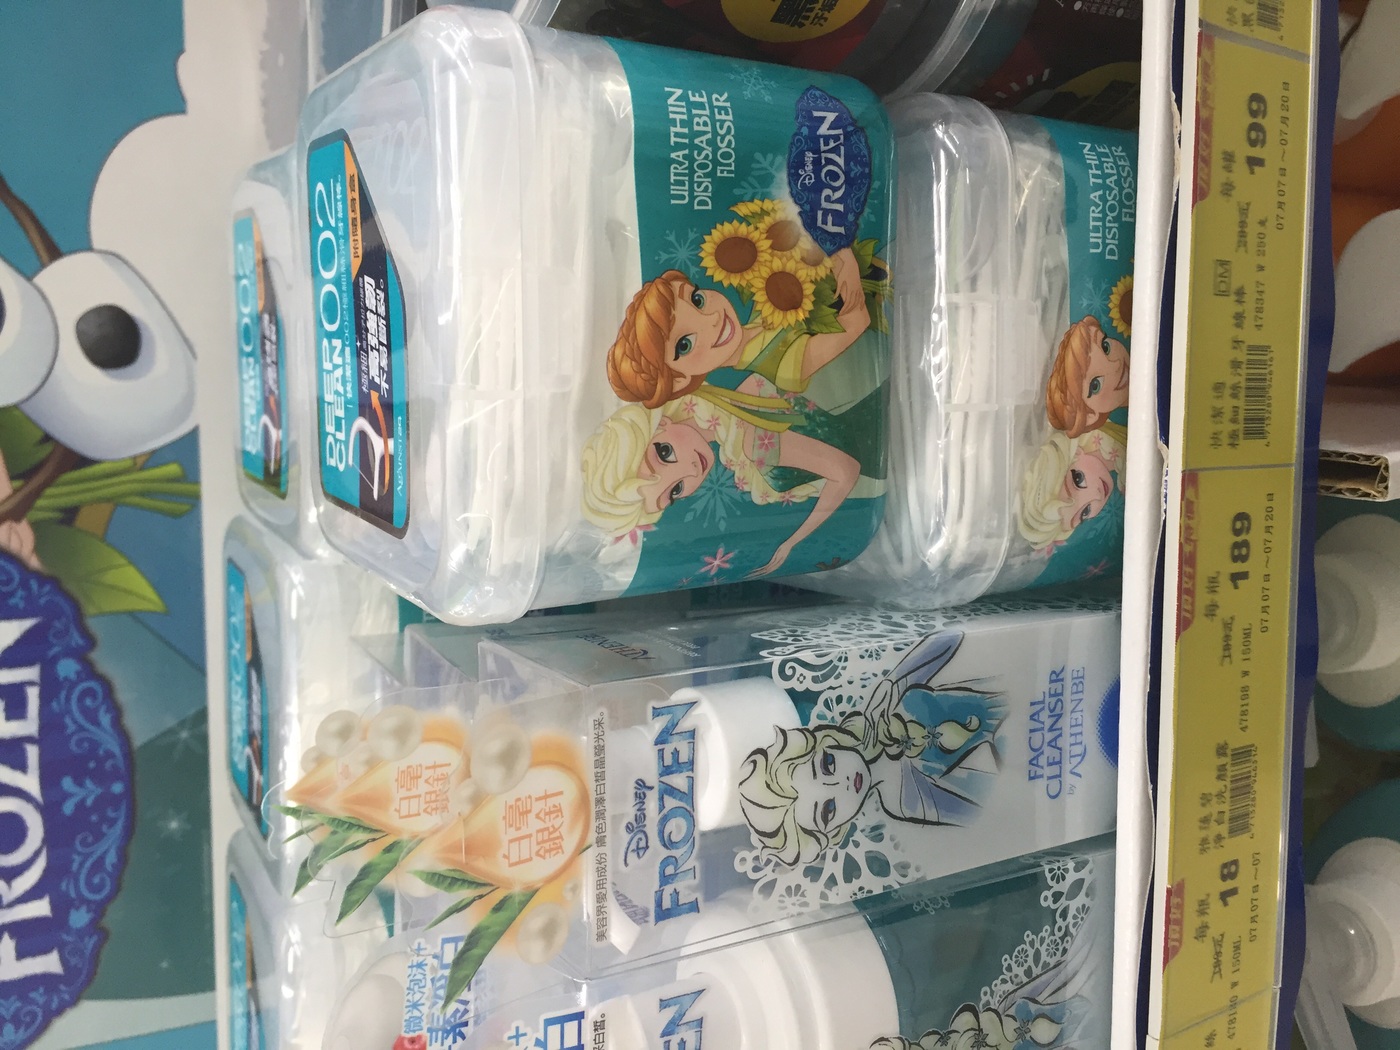 Apparently there is a 'Frozen' themed packet for every product in existence